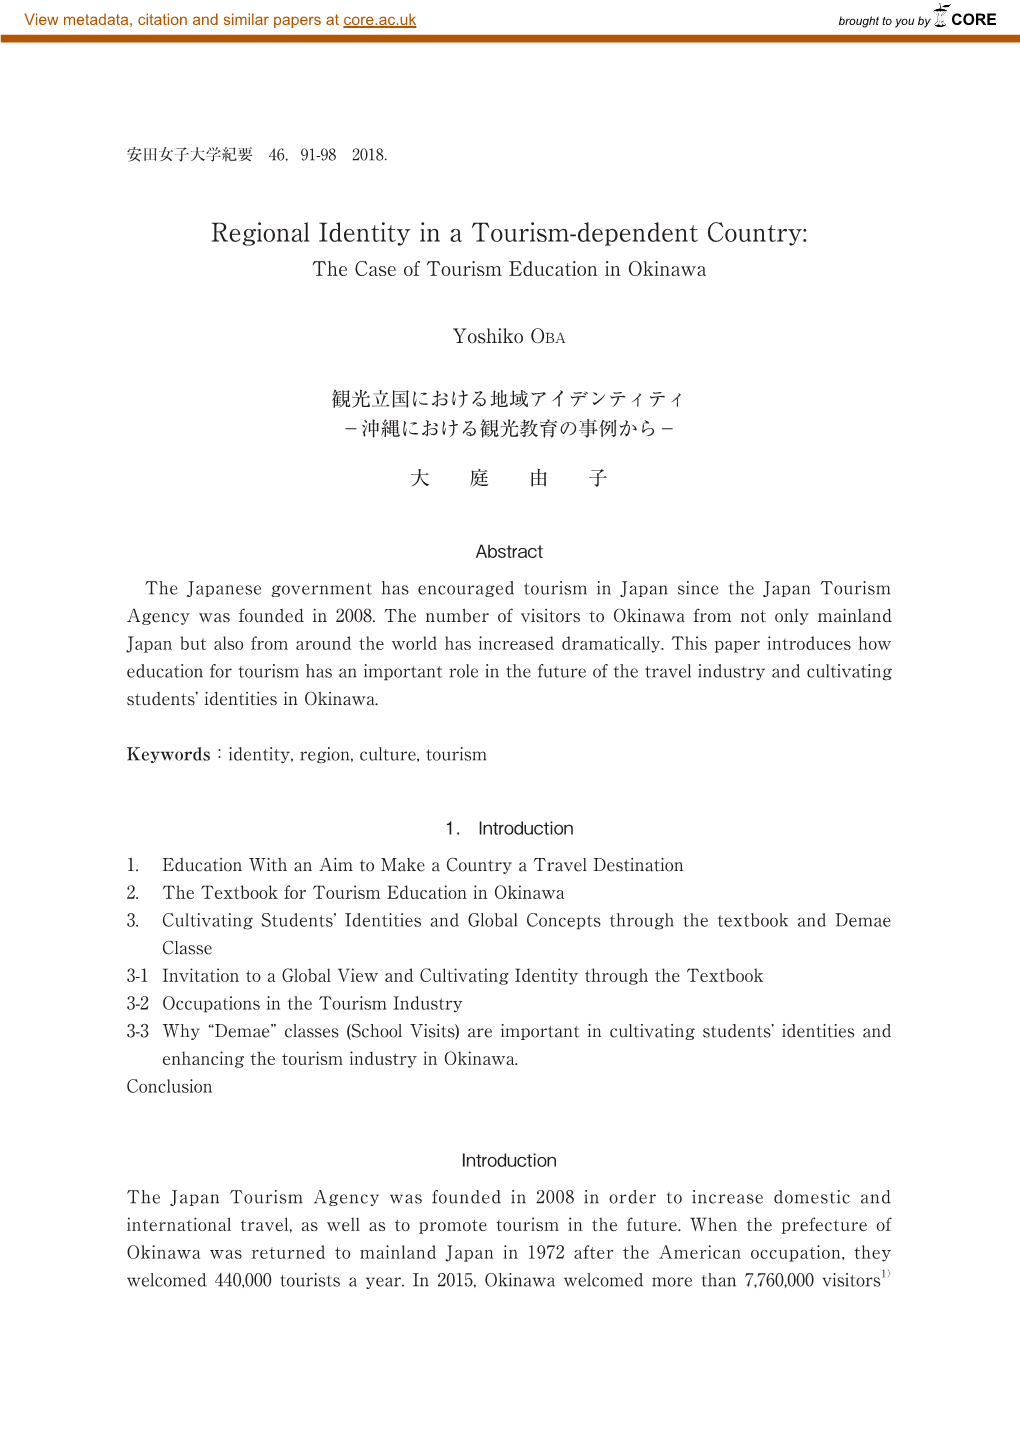 Regional Identity in a Tourism-Dependent Country: the Case of Tourism Education in Okinawa